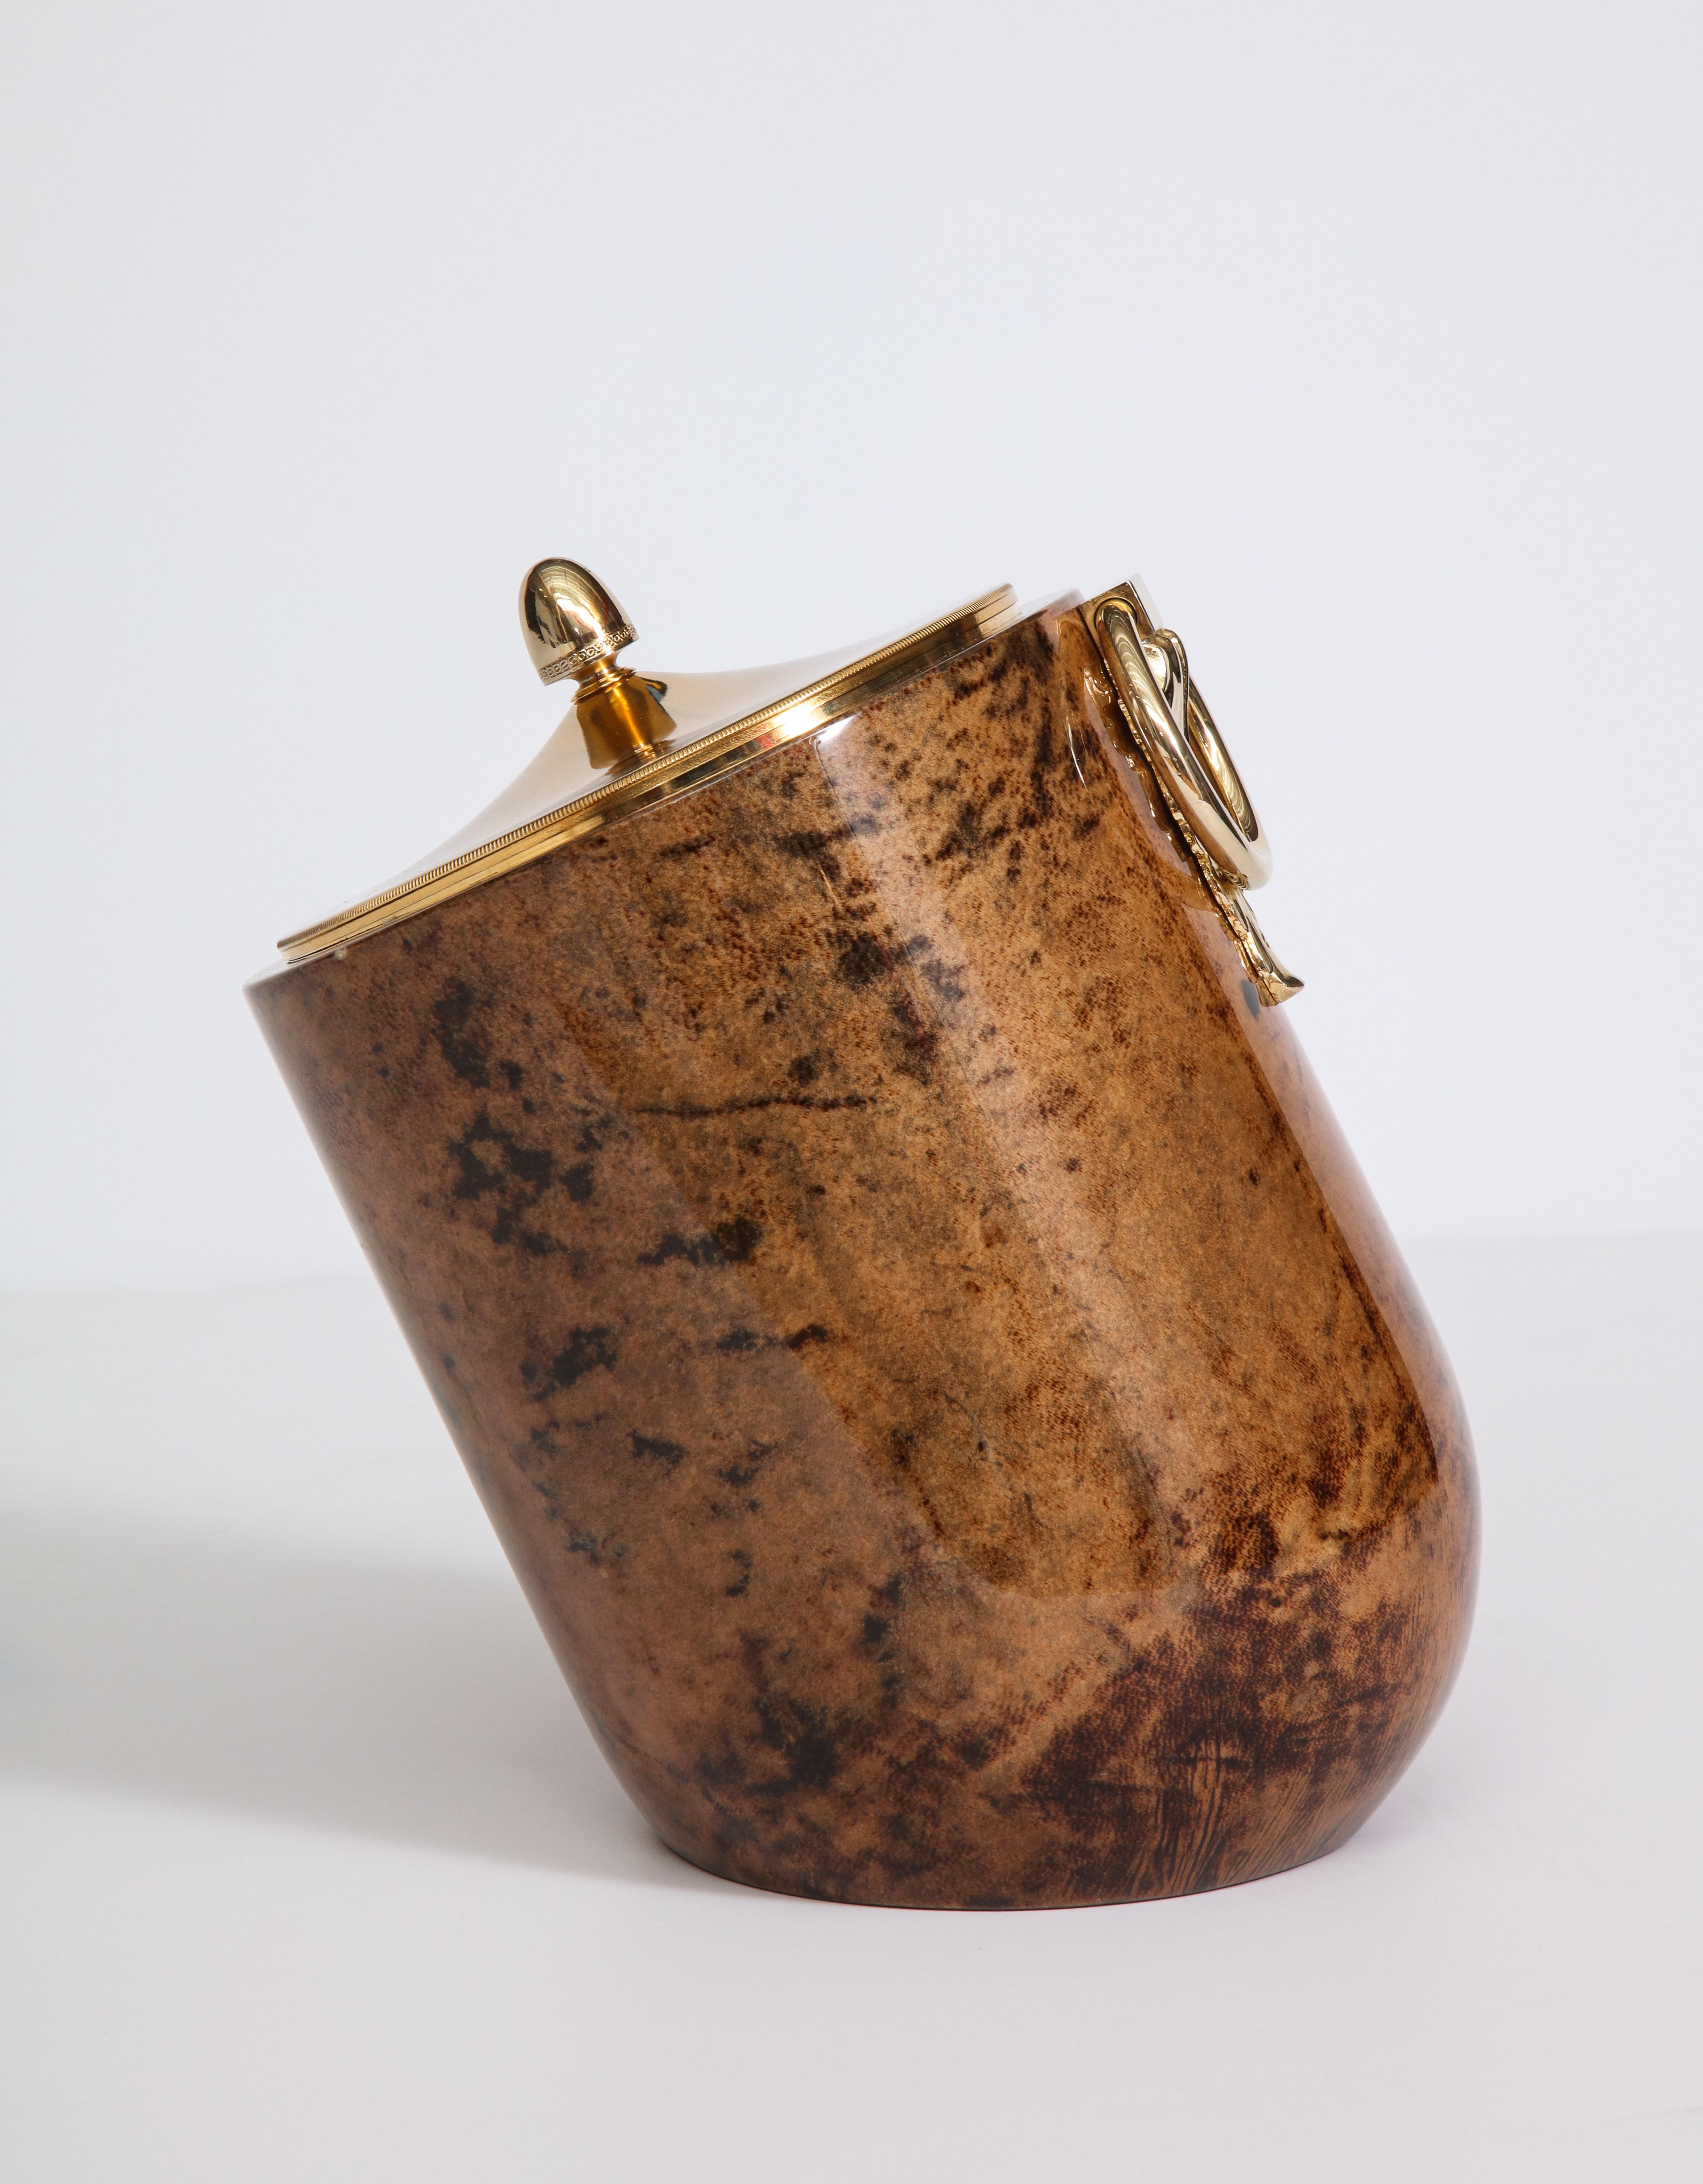 Decorative ice bucket by Aldo Tura, Italy, circa 1950. The goat skin parchment and the brass details are in very good condition. The item has been polished.